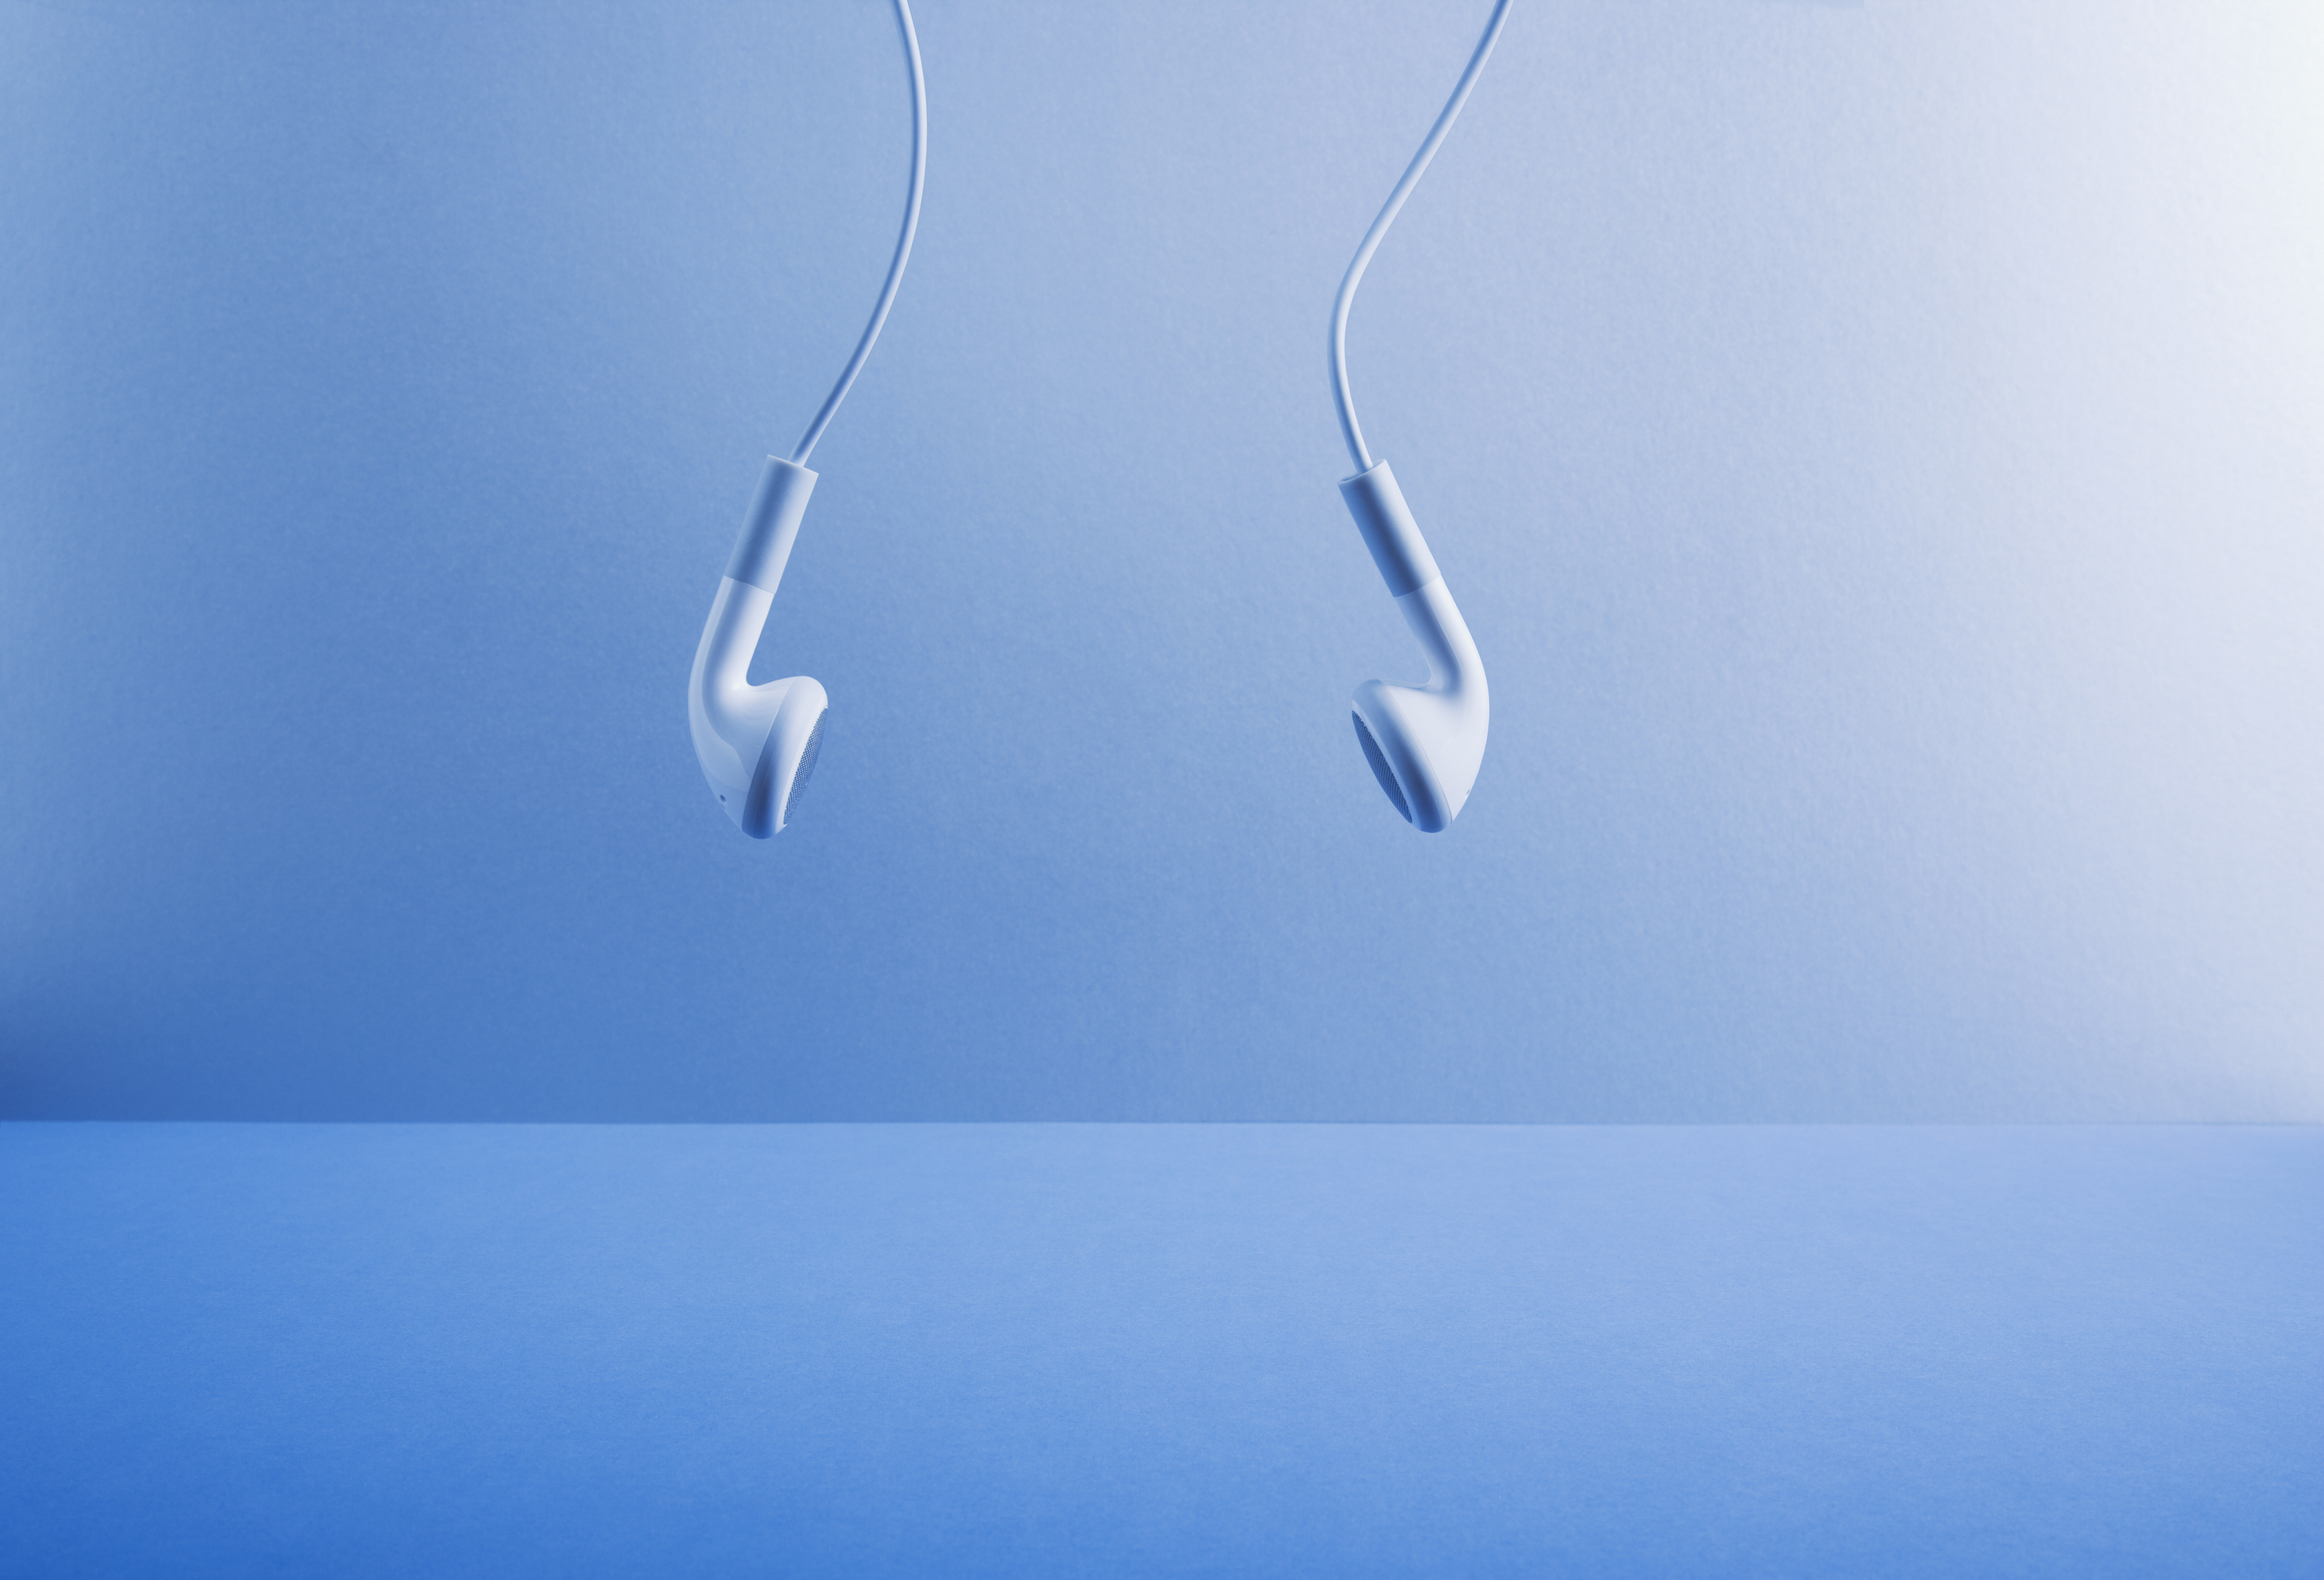 Image of white headphones hanging against a blue background.